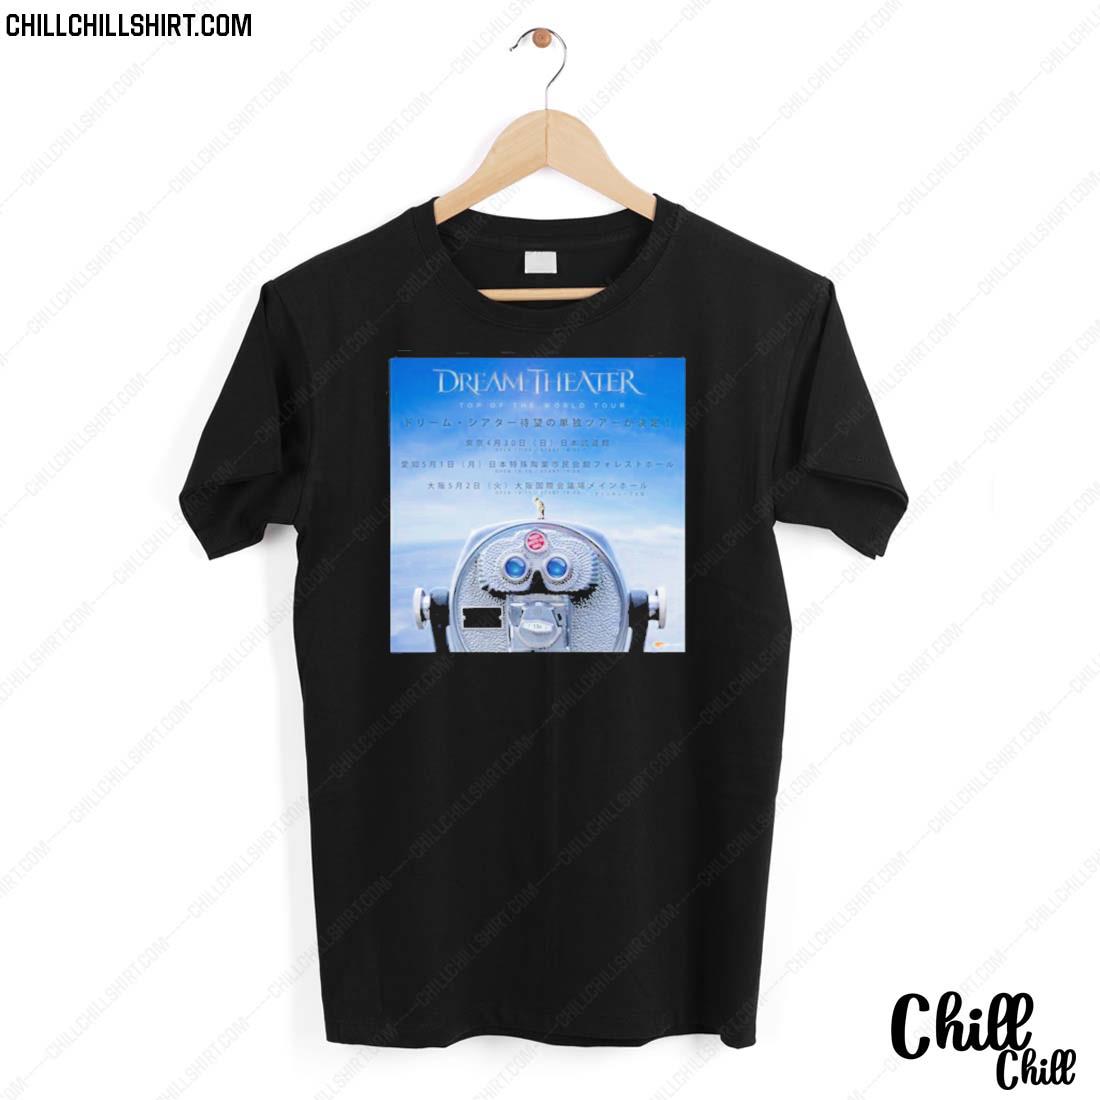 Nice japan Top Of The World Tour Dream Theater T-shirt